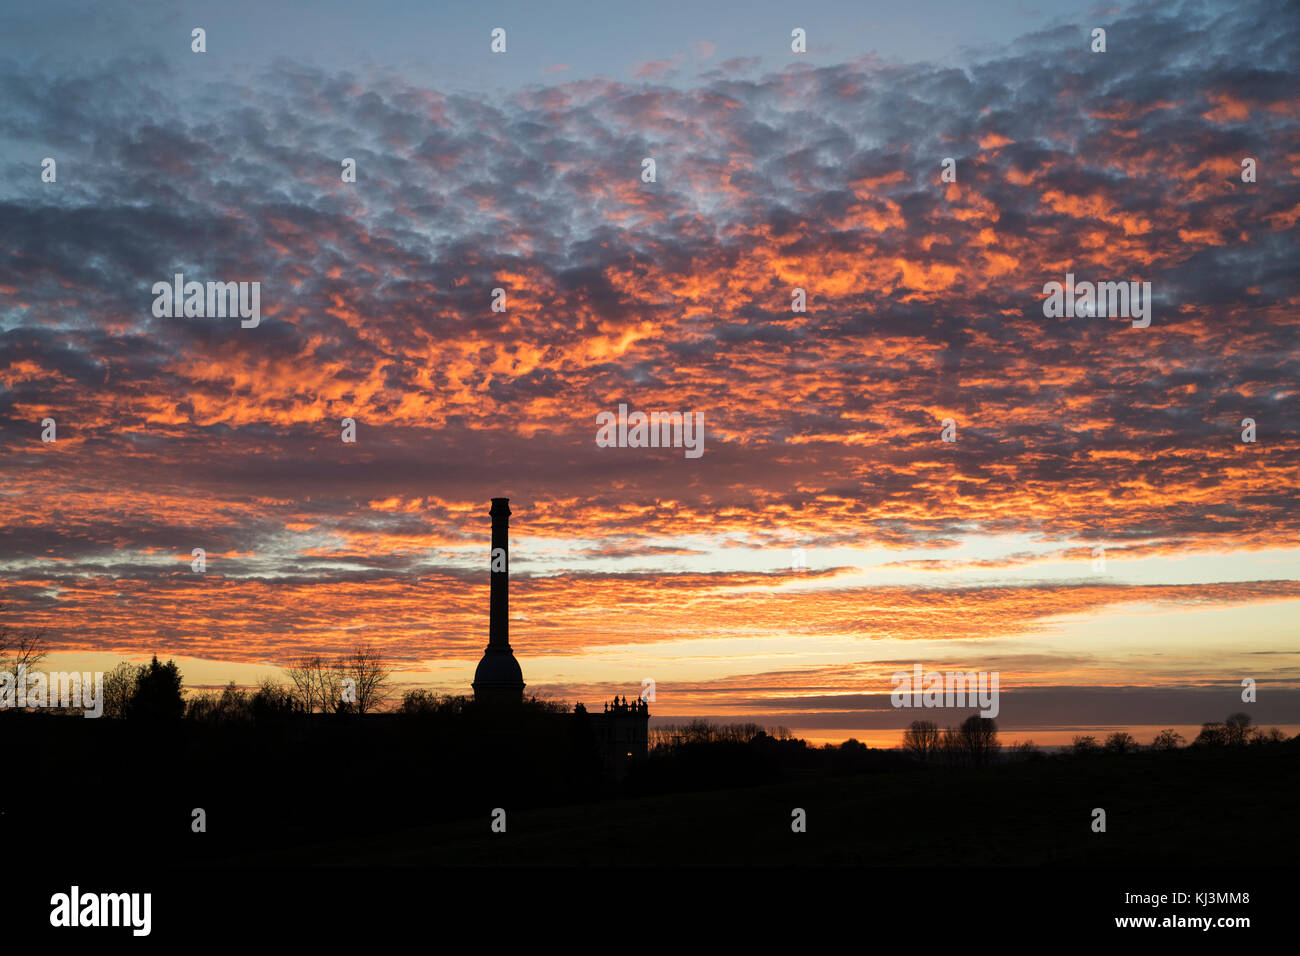 Sunset over Bliss Tweed Mill. Silhouette. Chipping Norton, Cotswolds, Oxfordshire, England Stock Photo